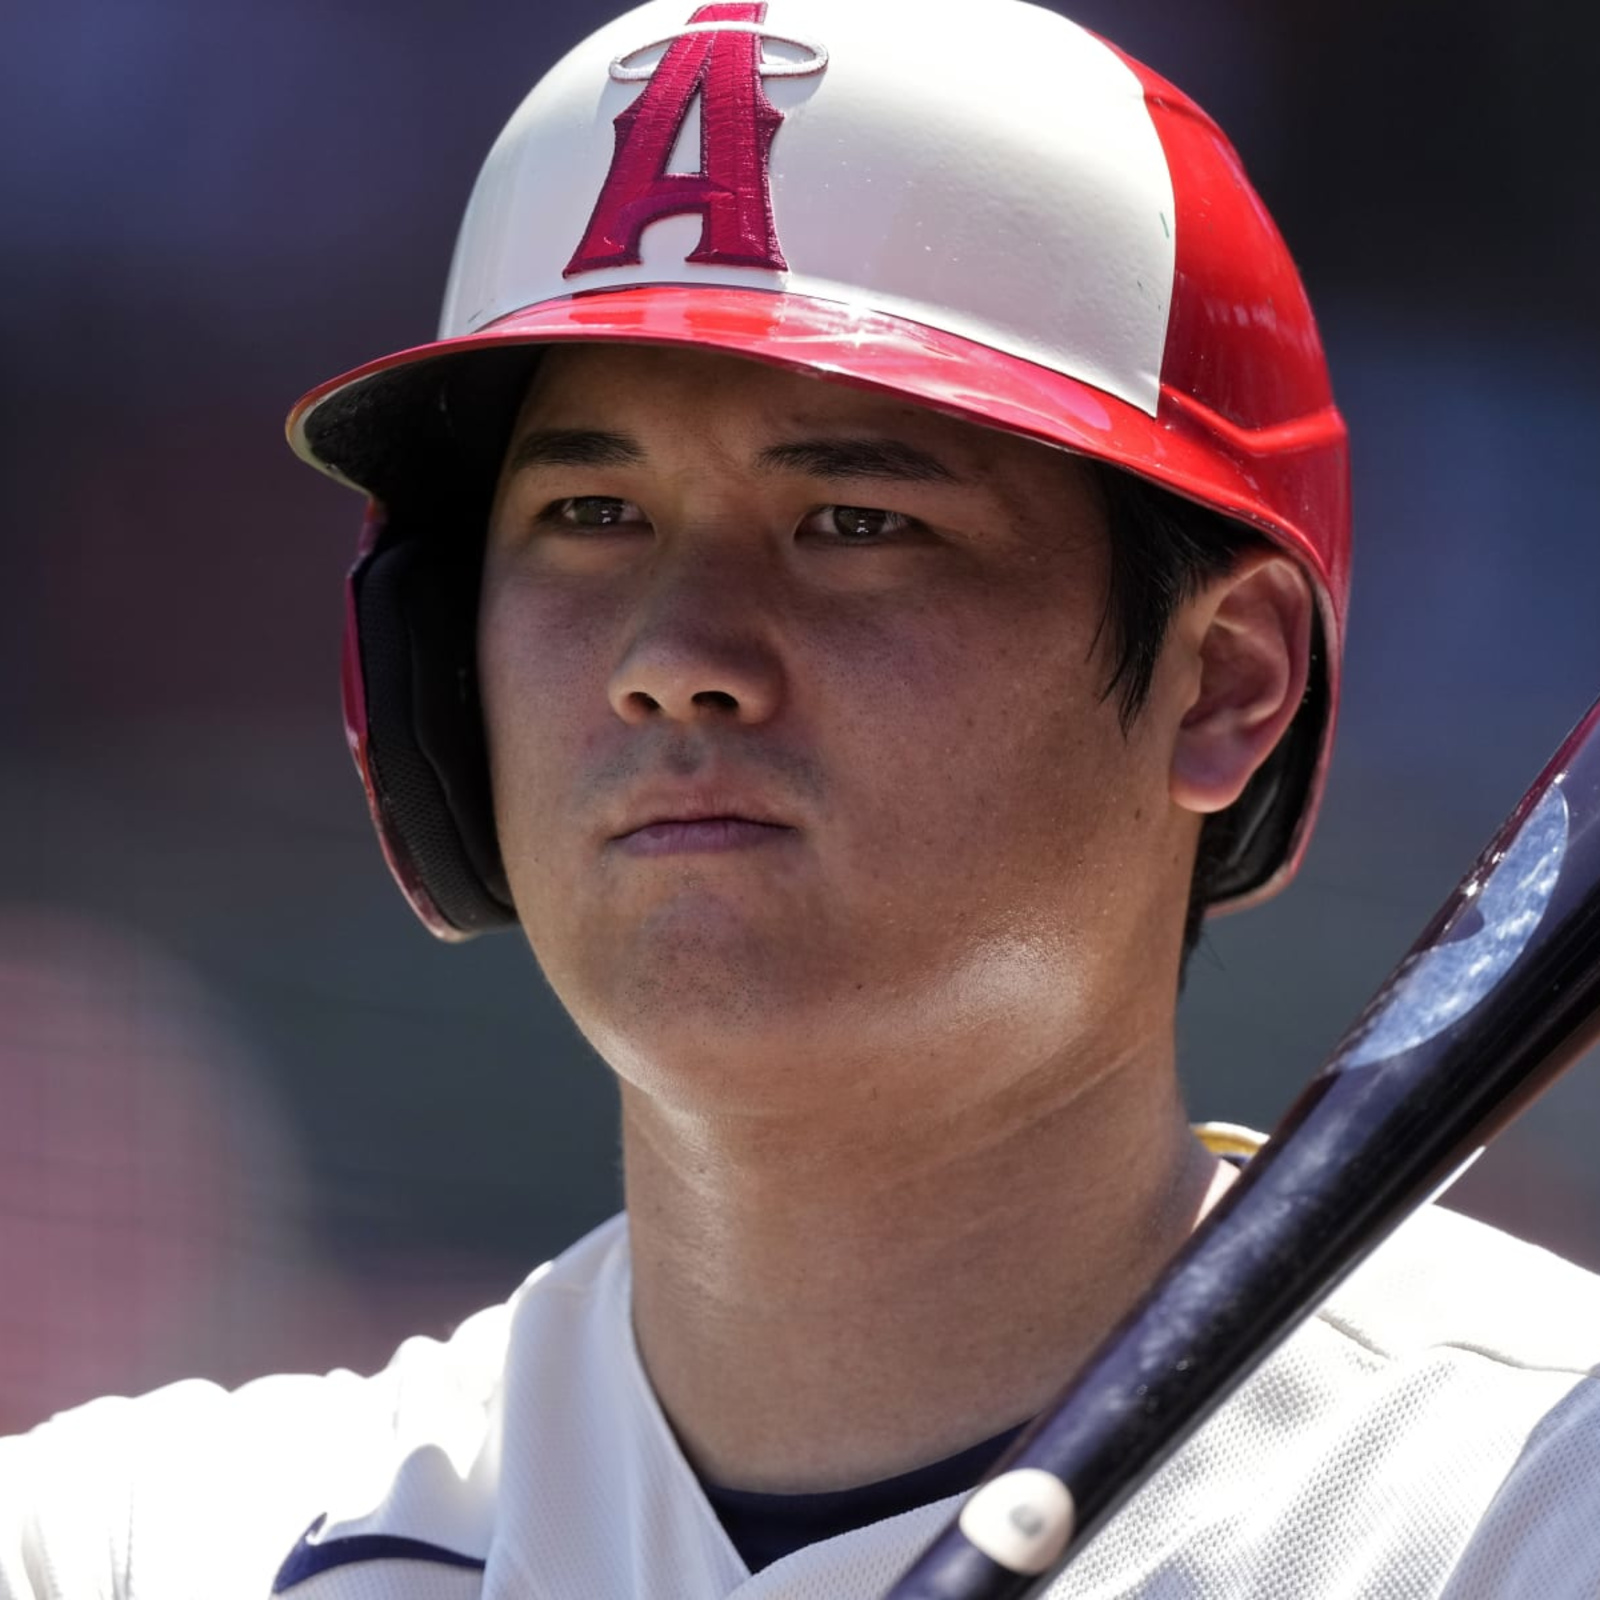 Fan favorite Shohei Ohtani tired of losing, vague on free agency